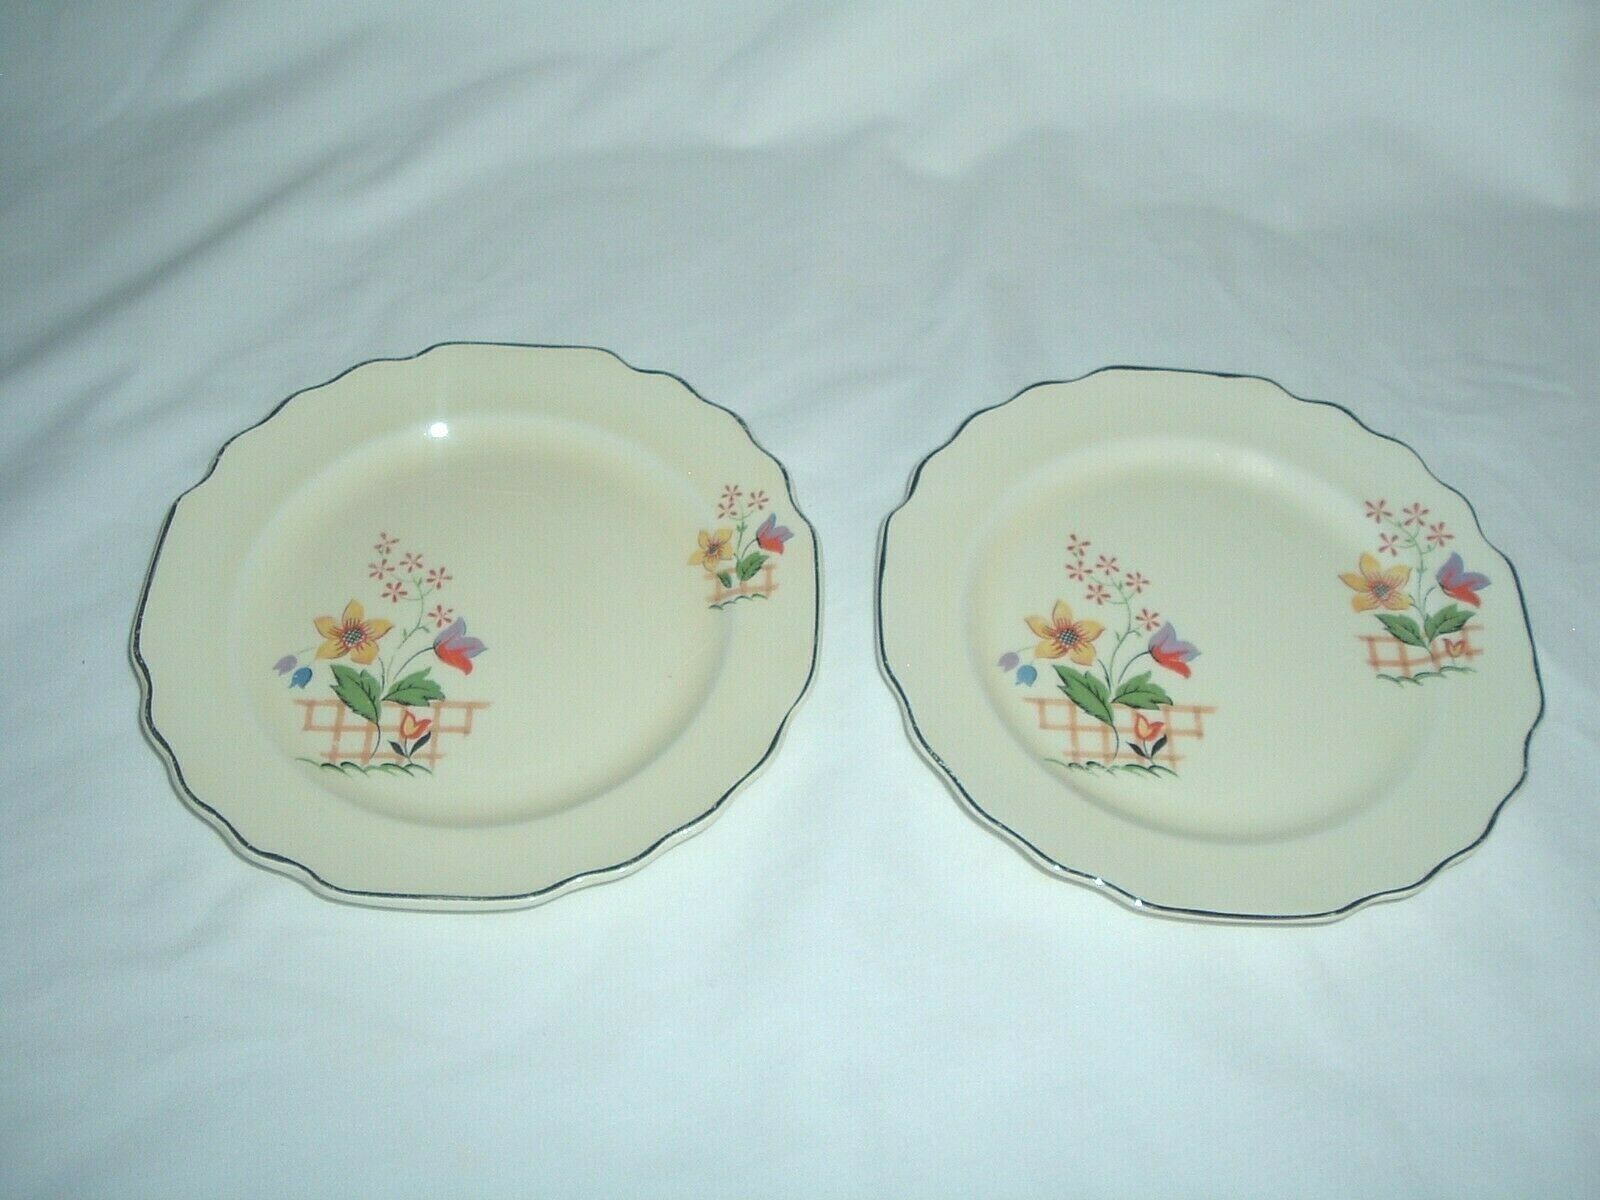 2 Gaylea Lido Canarytone W. S. George China Dinner Plate 9 1/2"